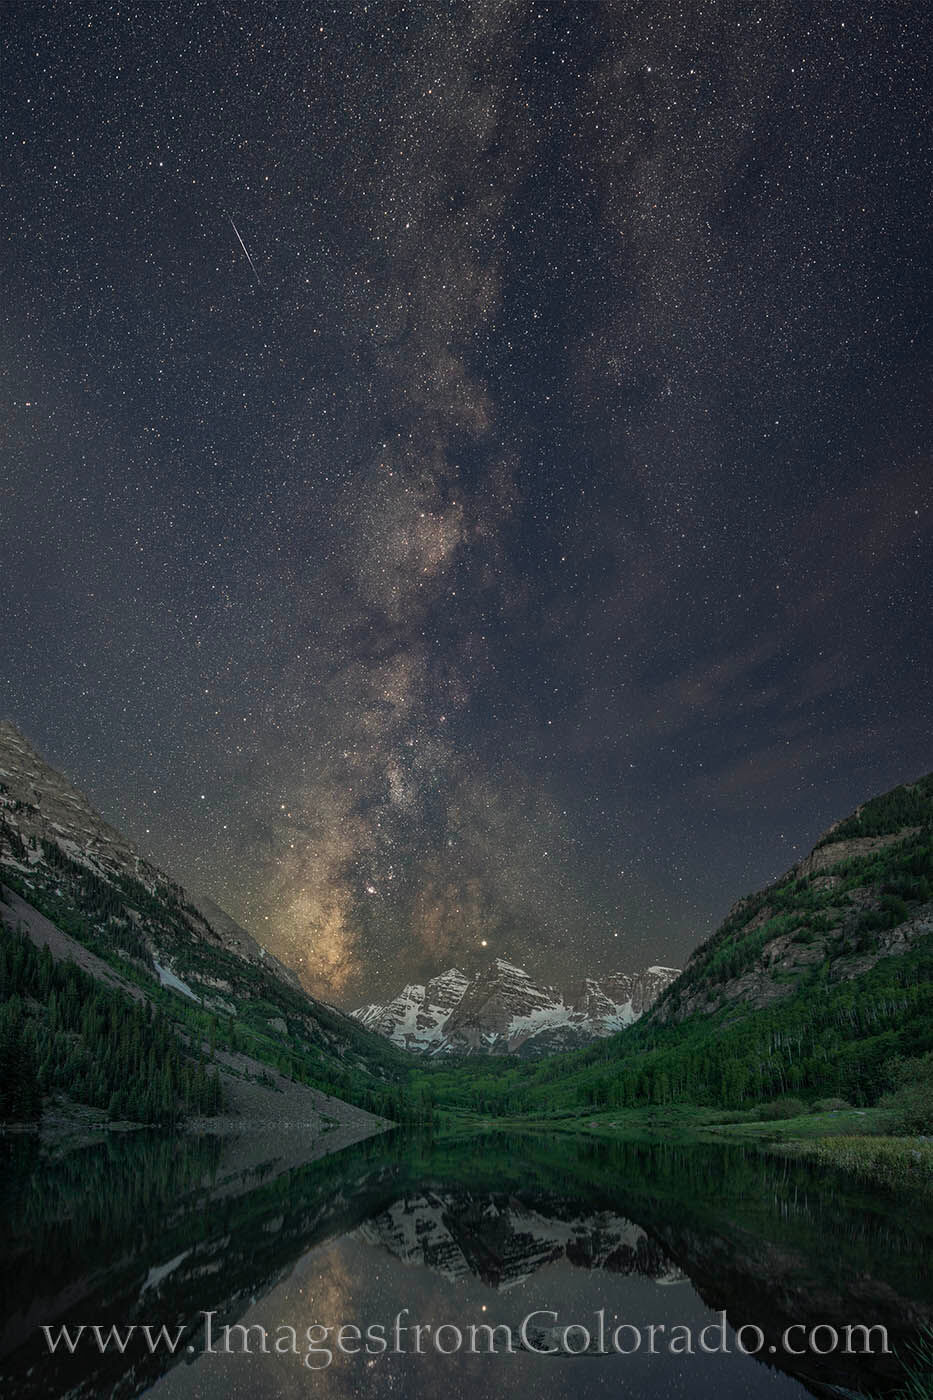 High clouds drifted by as I was photographing the Milky Way over the iconic Maroon Bells near Aspen and Snowmass, Colorado. I...